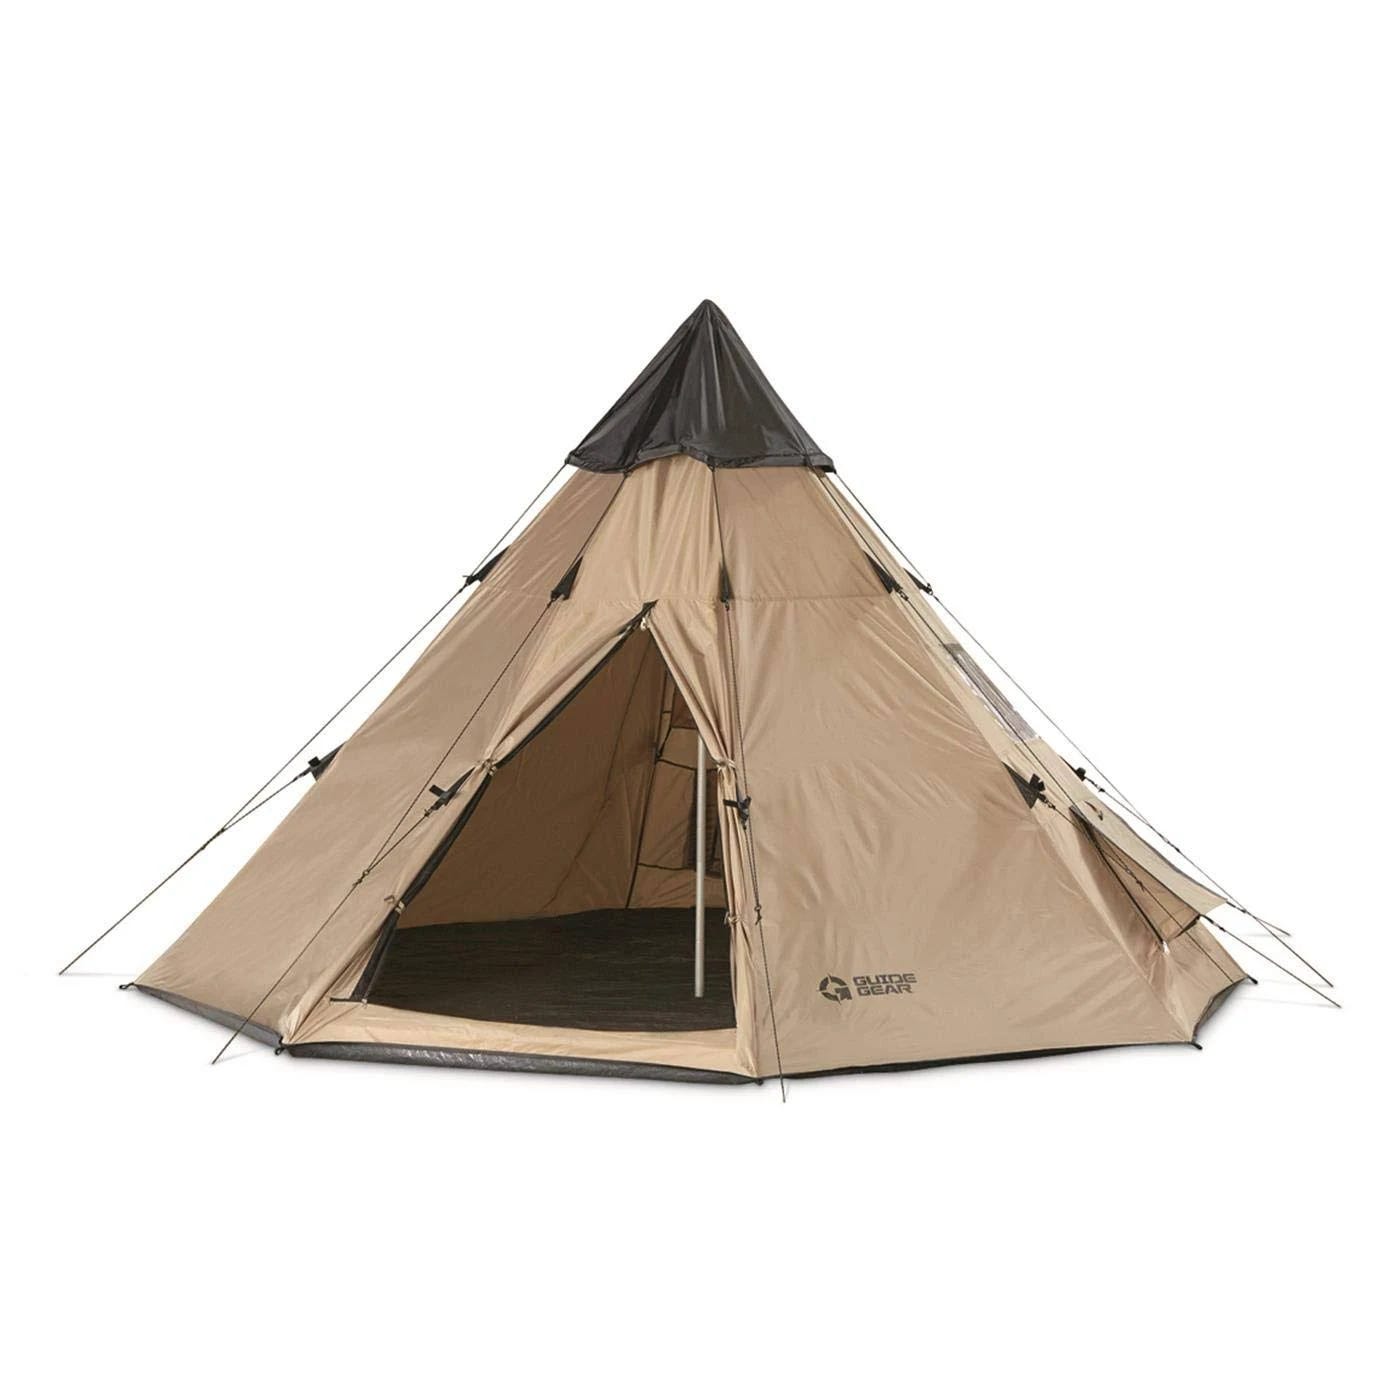 Waterproof Teepee Tent for 2 People - 10' x 10' Guide Gear Camping Adventure | Image